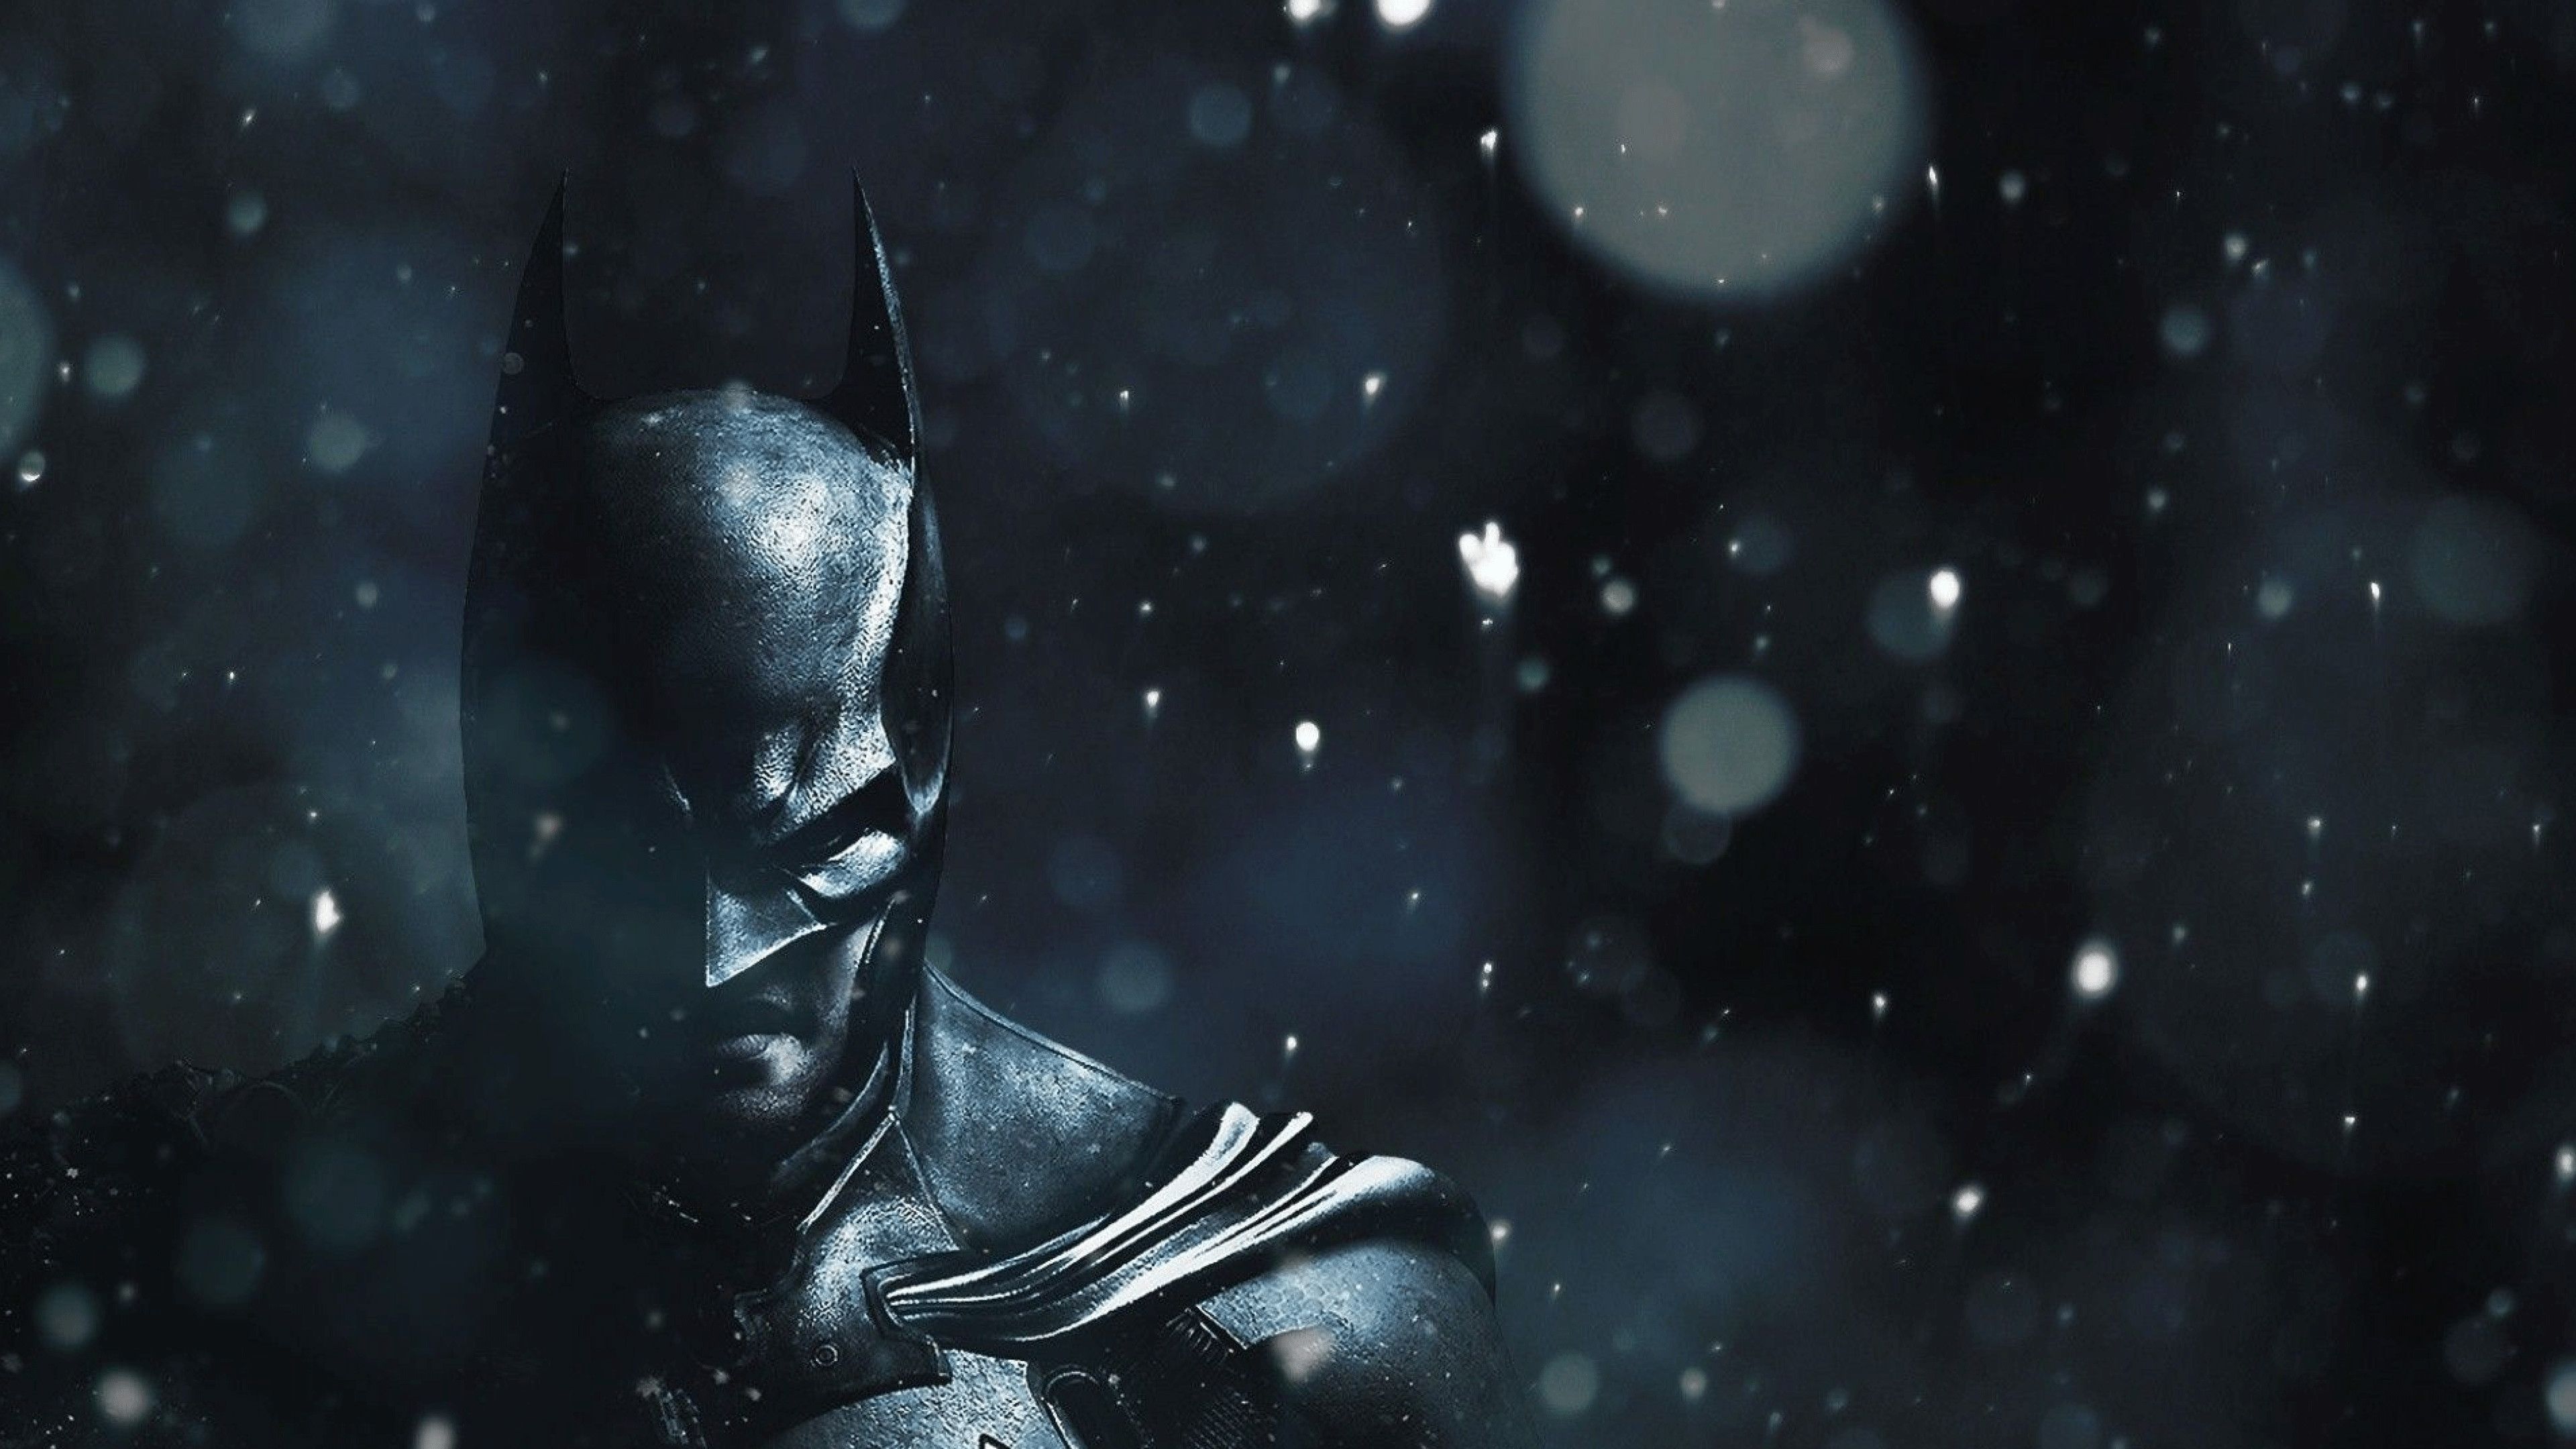 Collection Of Batman Pc Wallpaper On Hdwallpaper Wallpaper Ultra HD HD Wallpaper